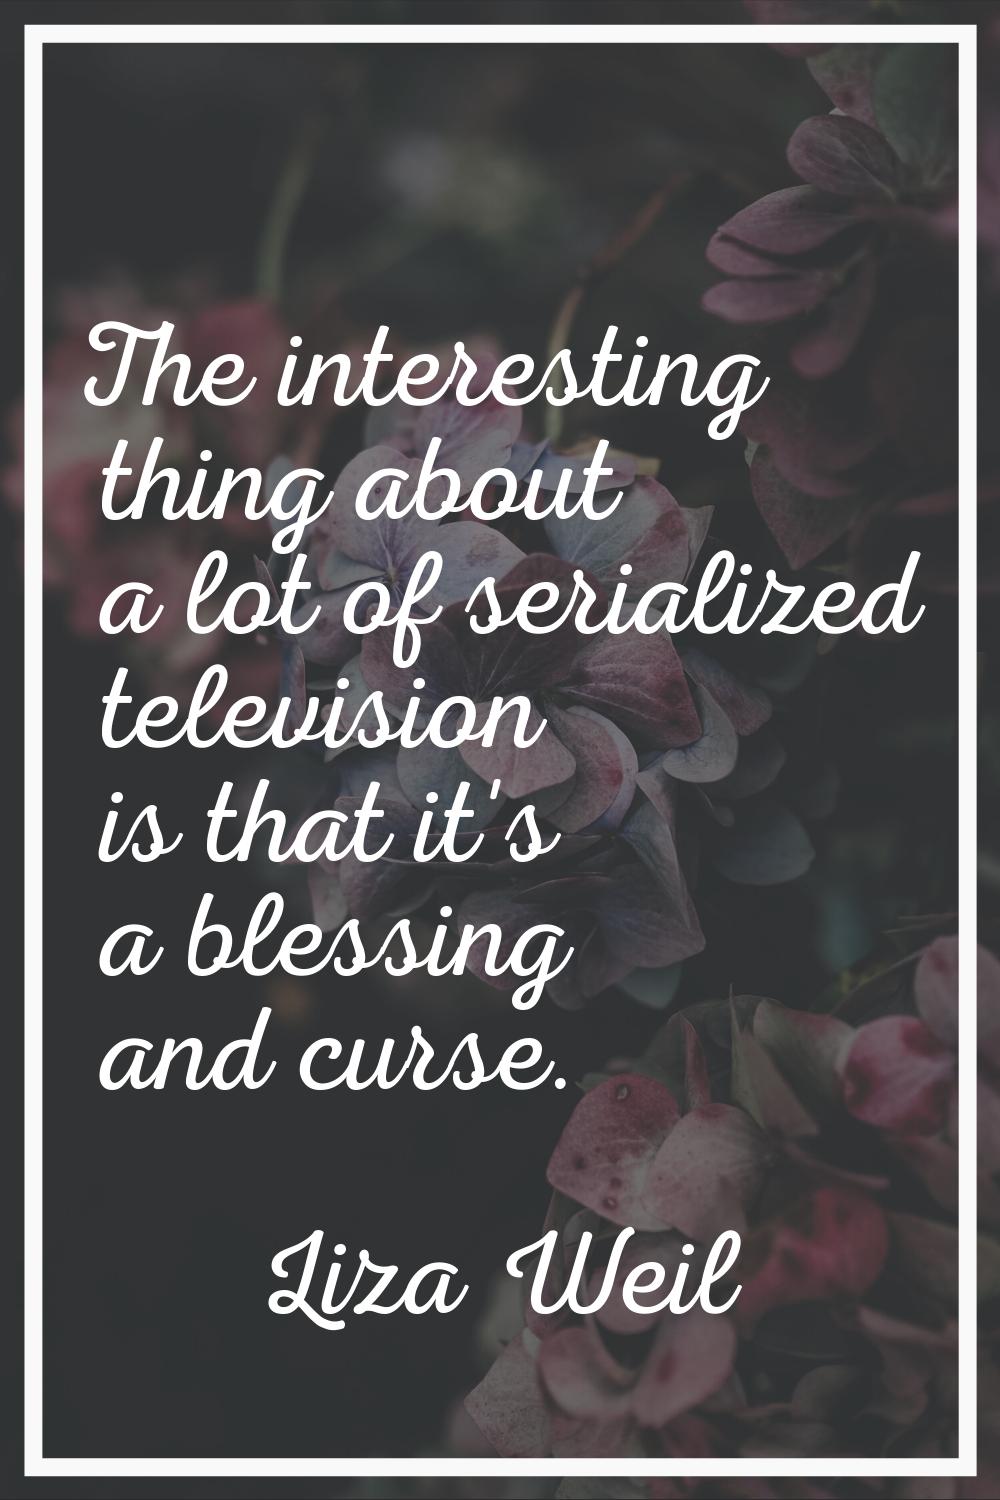 The interesting thing about a lot of serialized television is that it's a blessing and curse.